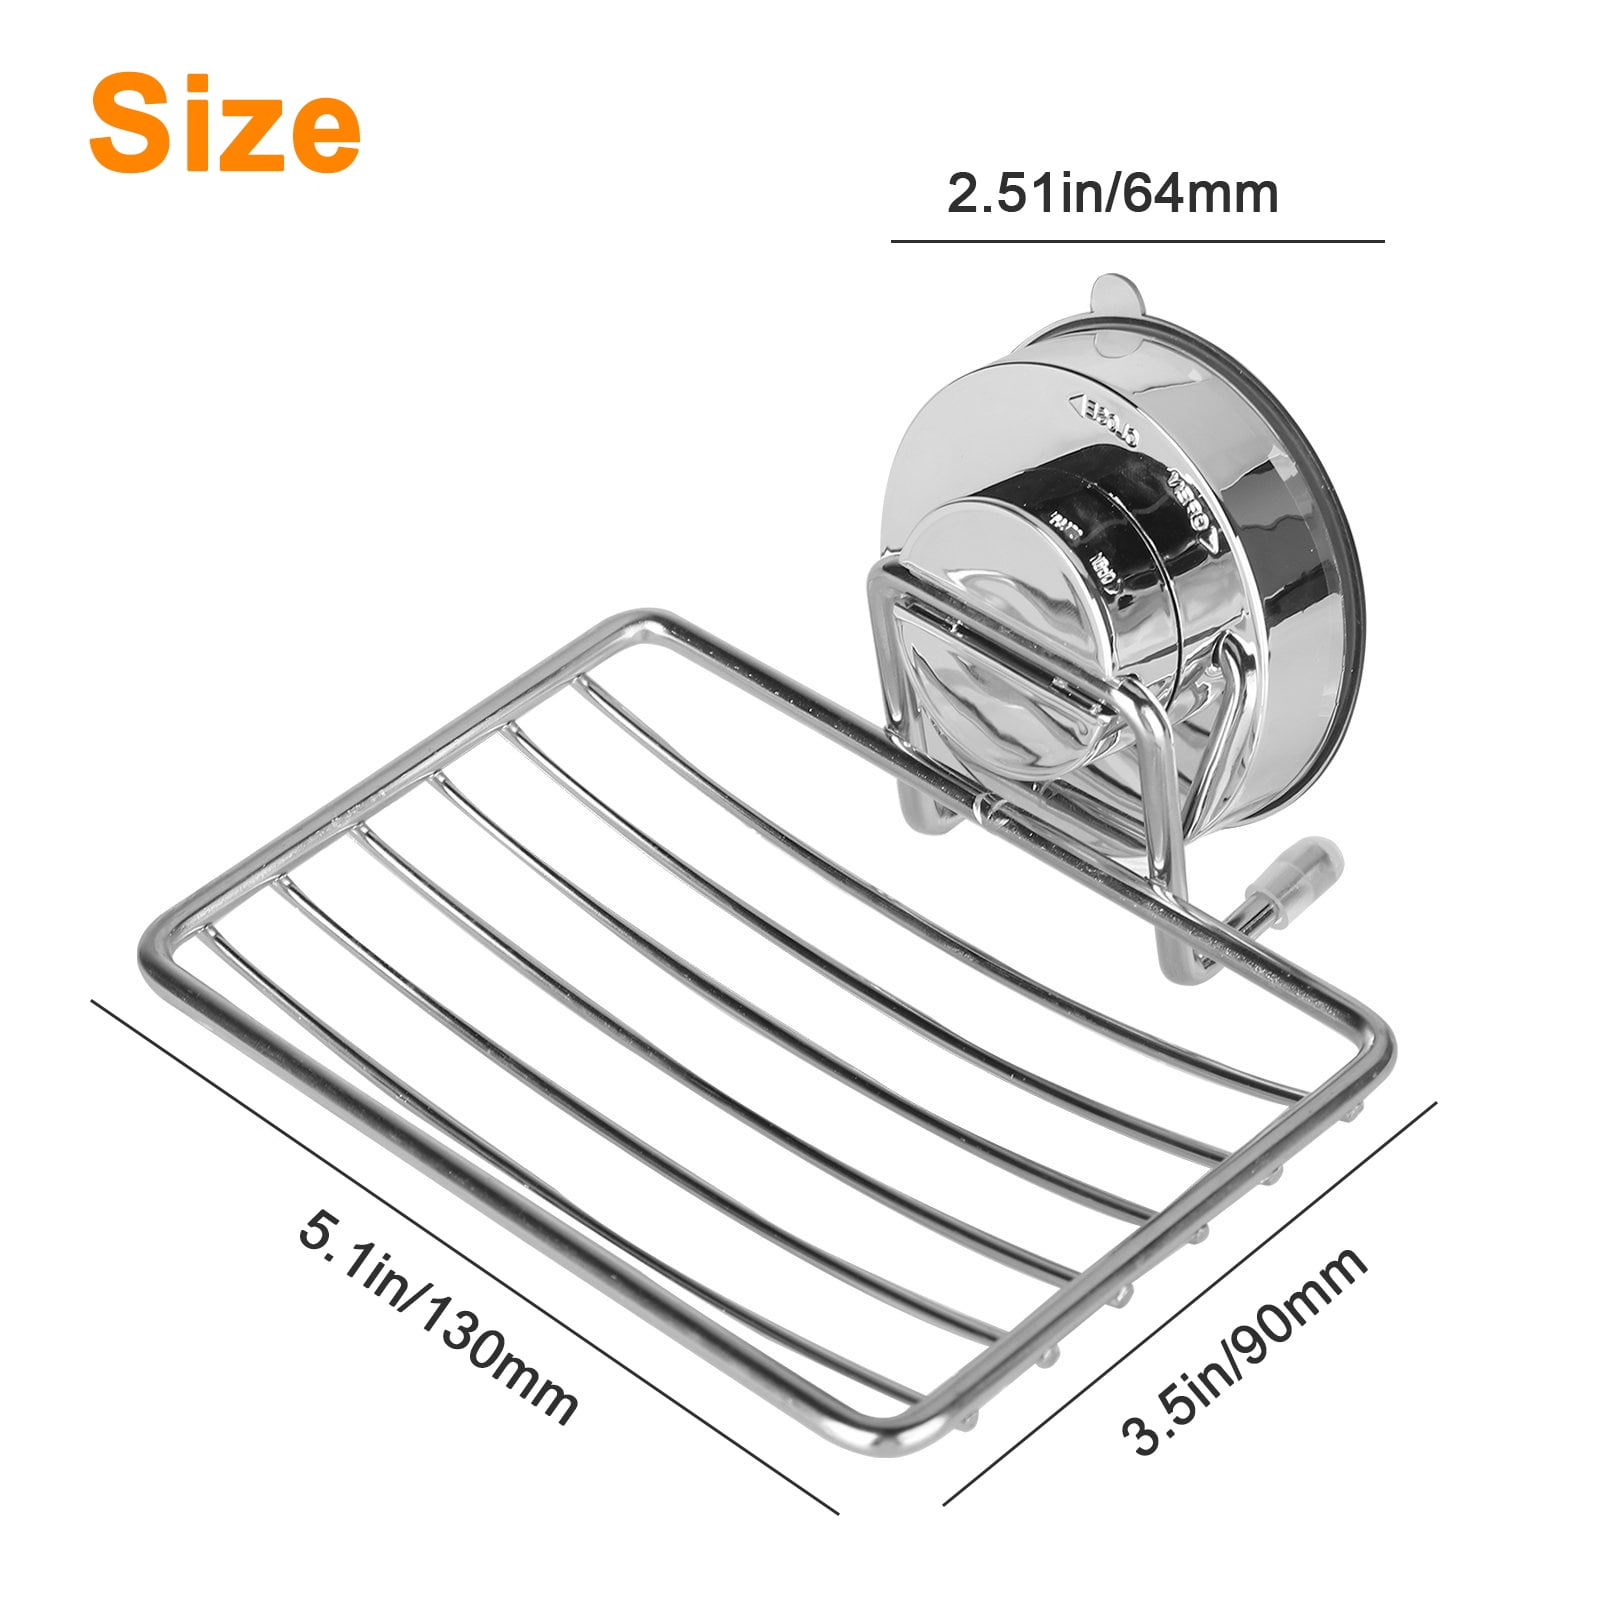 Bathroom Stainless Steel Suction Cup Soap Dish Drain Tray Holder Storage Rack 